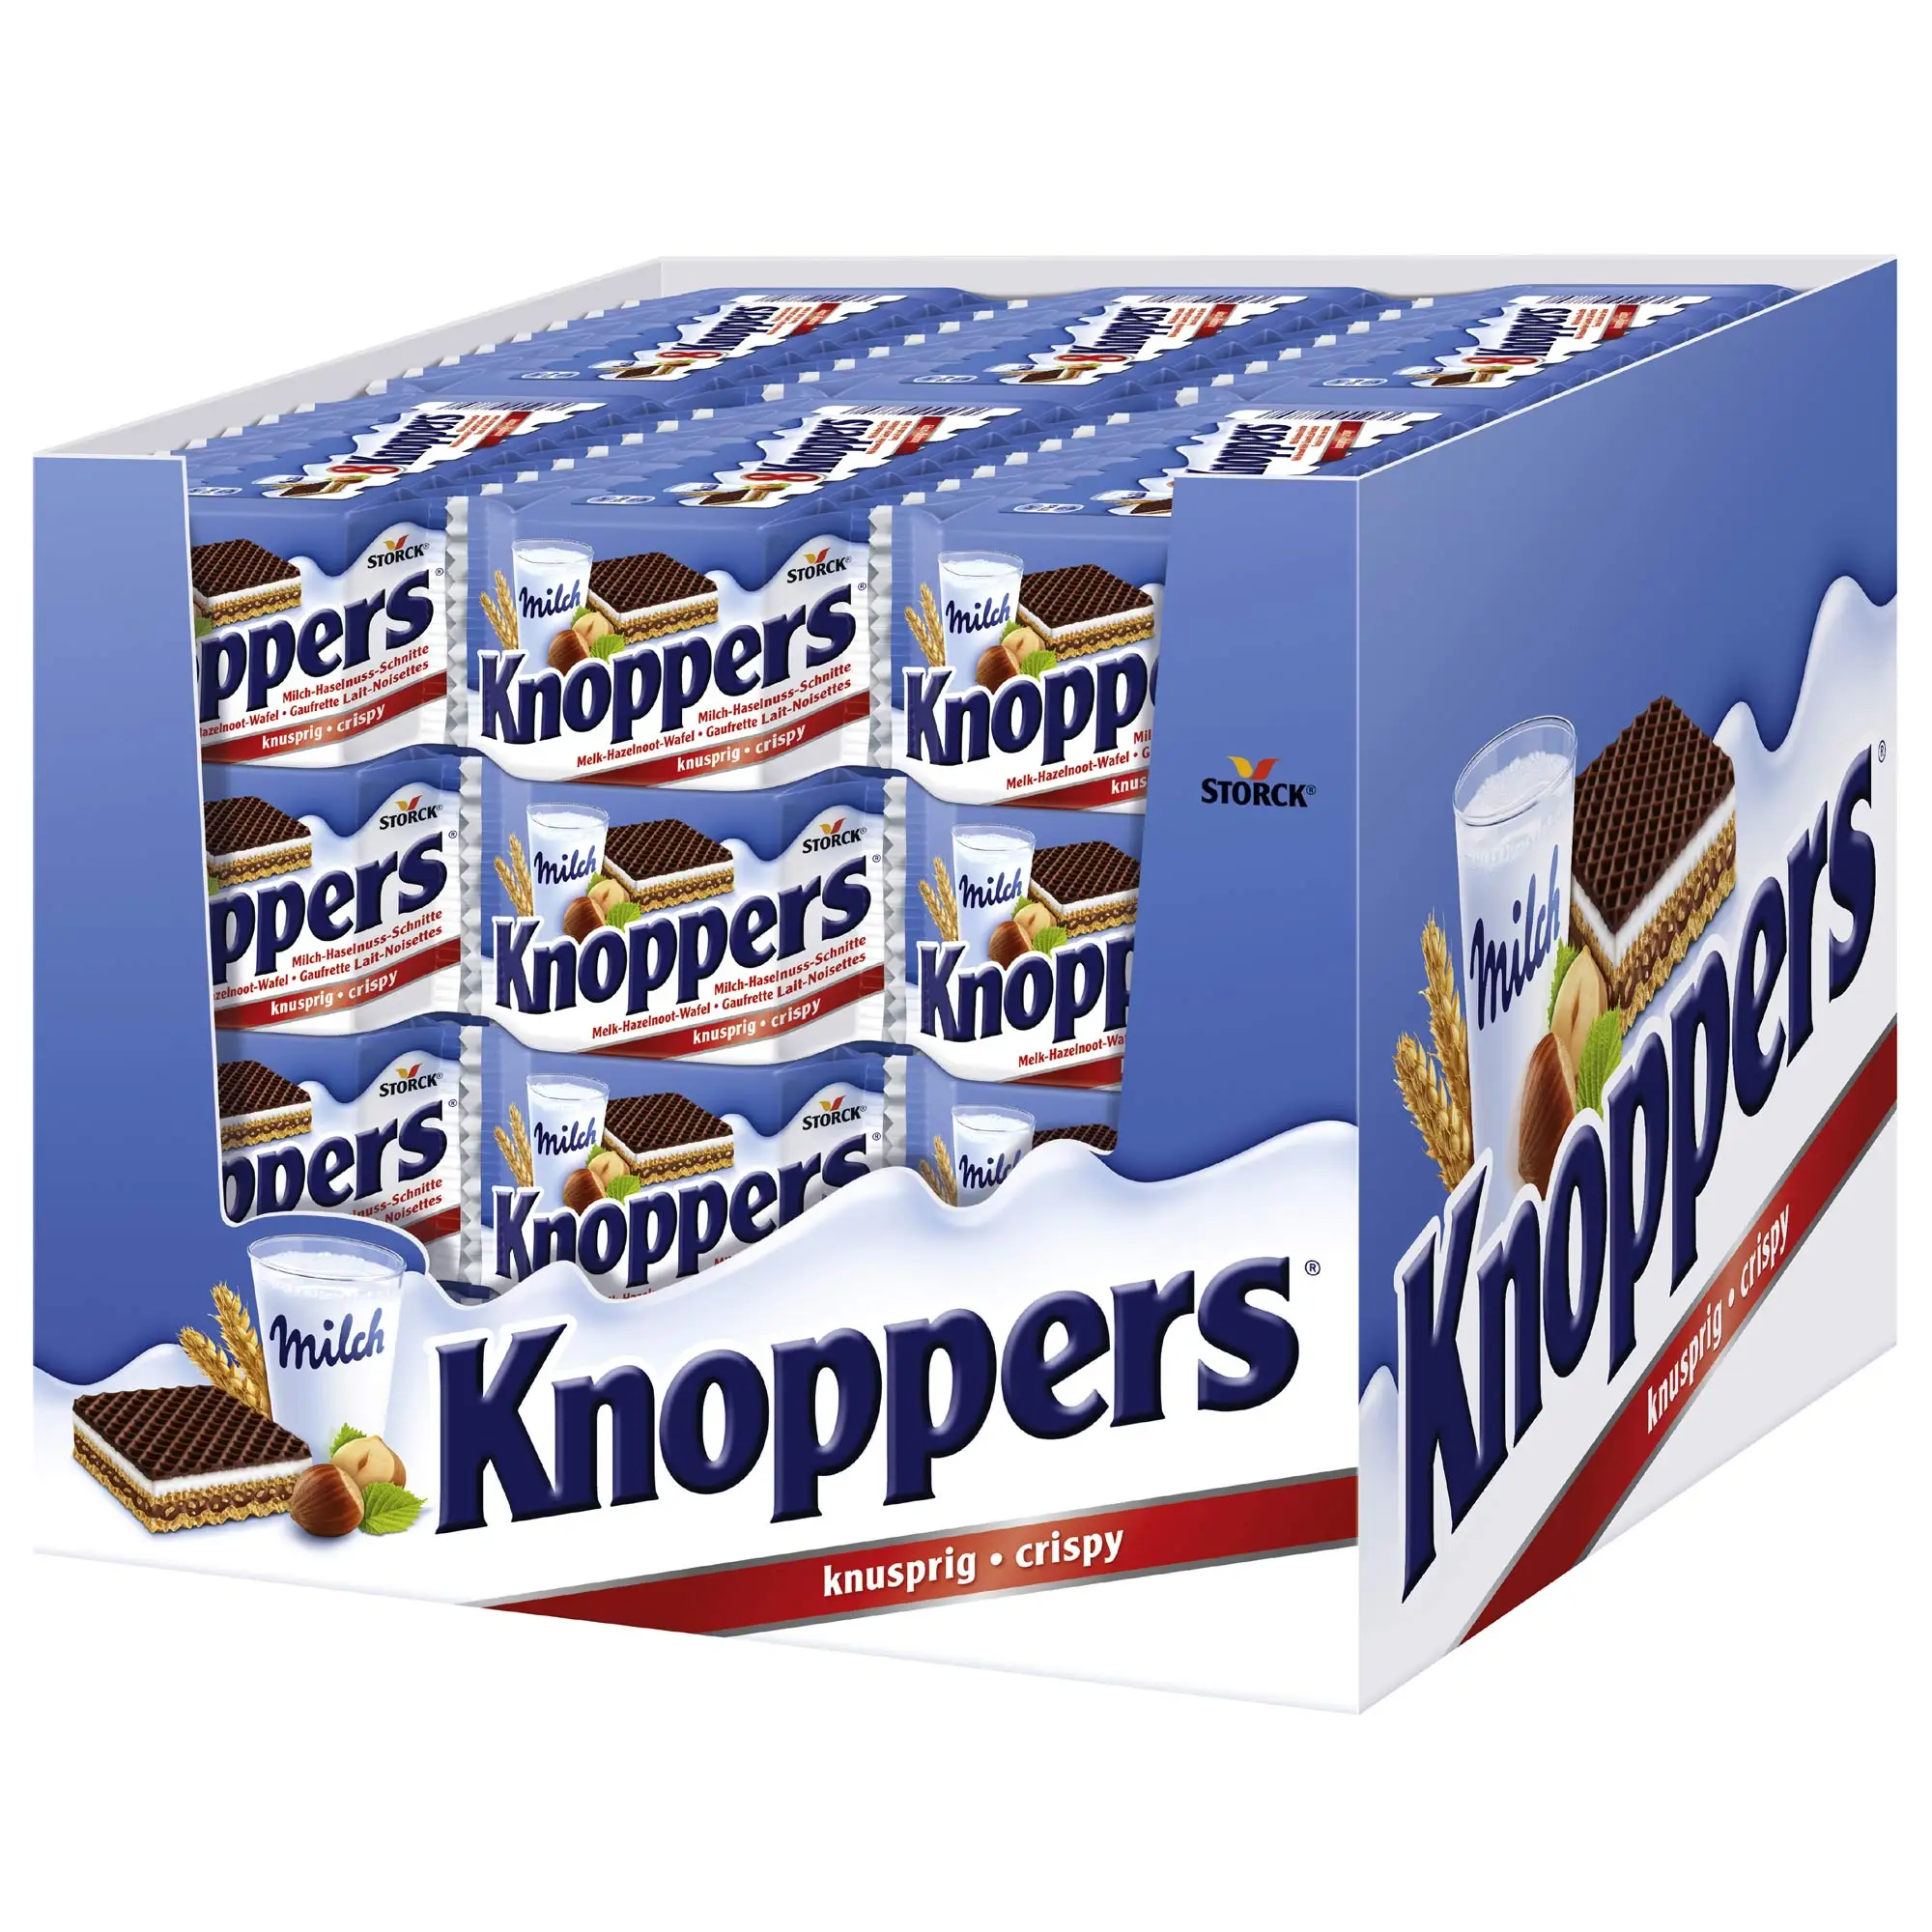 Knoppers. Storck knoppers. Knoppers вафли. Конфеты knoppers. Вафли немецкие knoppers.